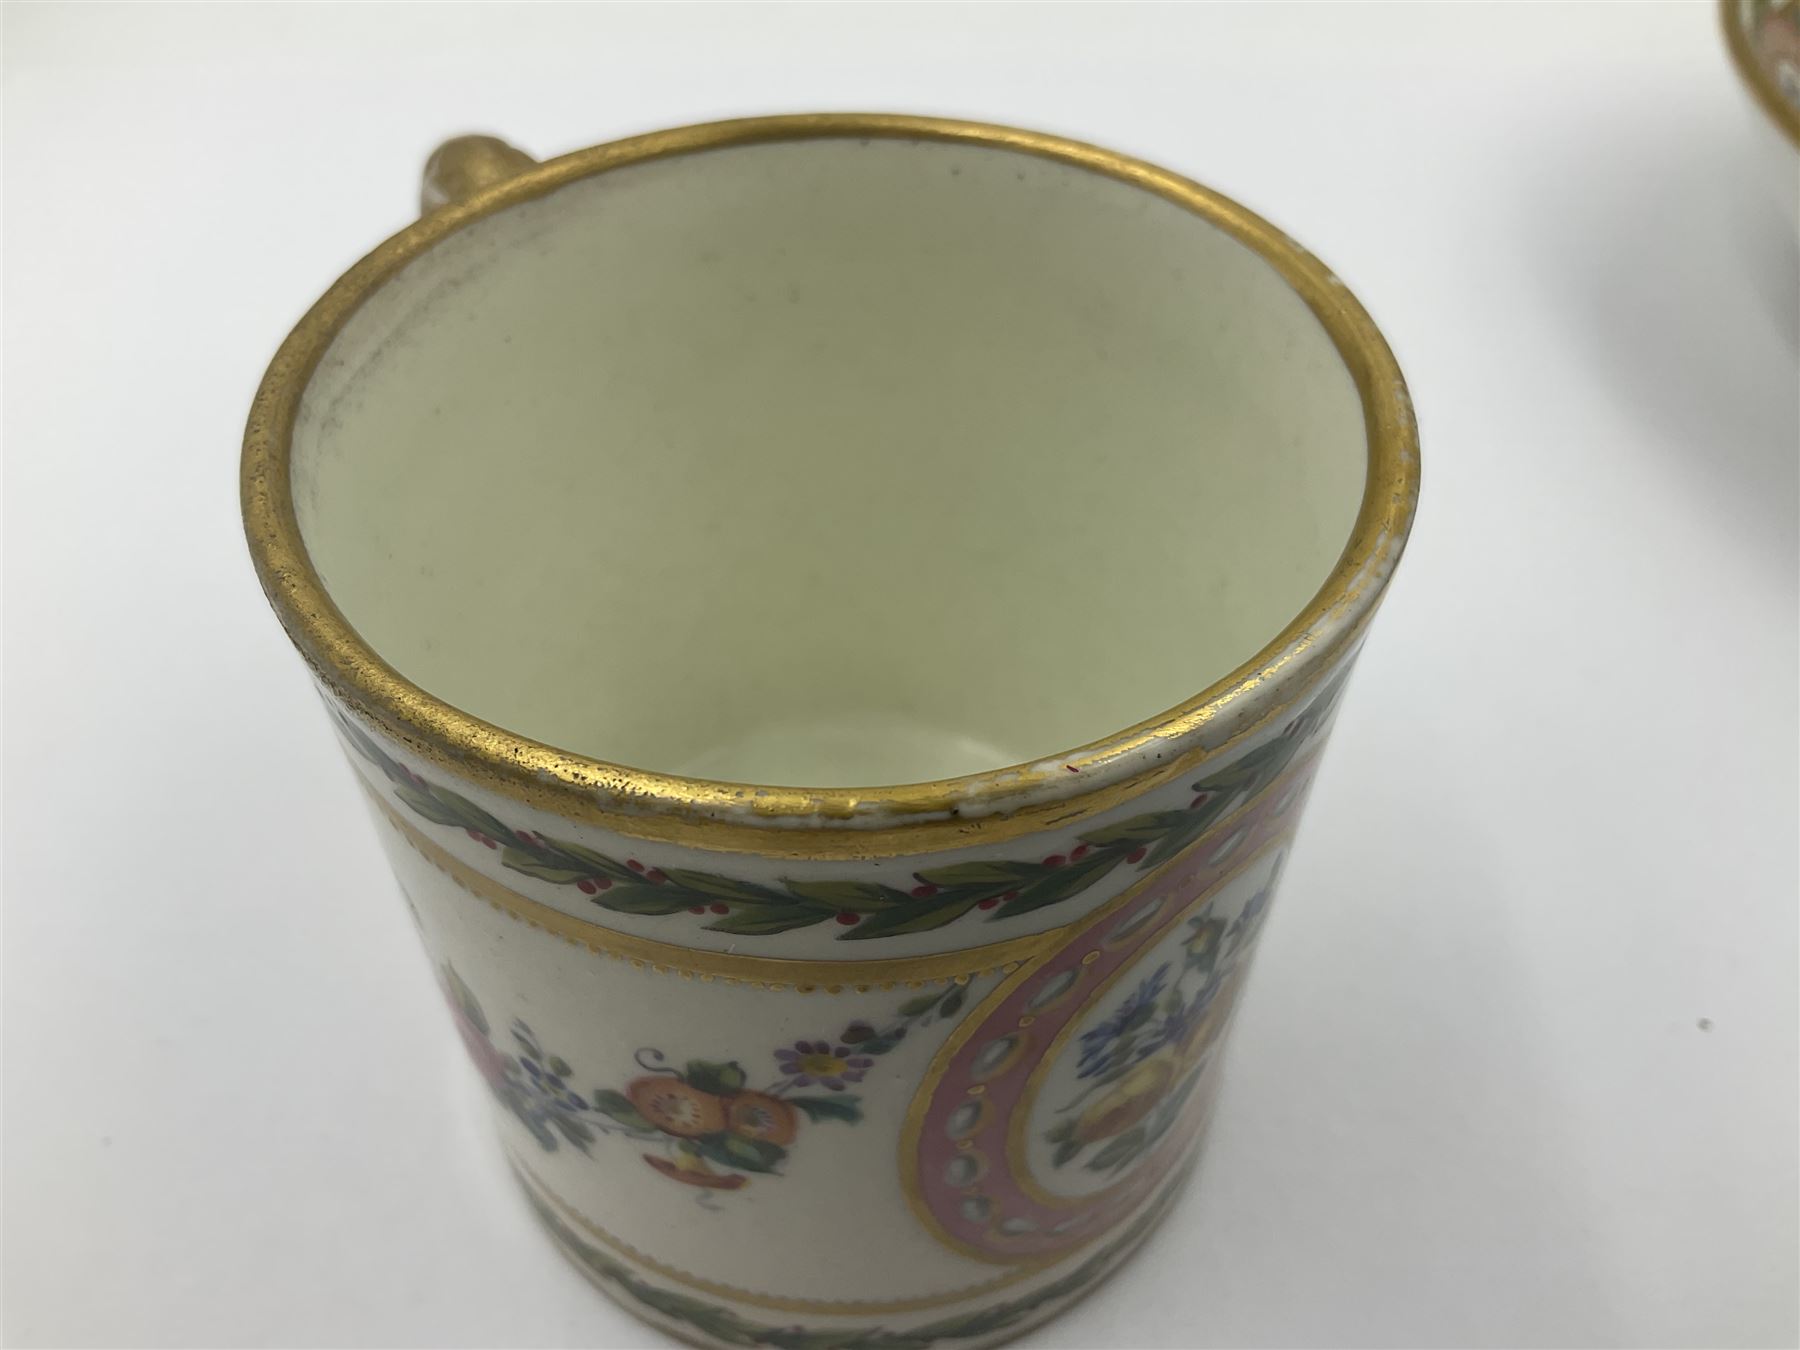 Sevres soft paste porcelain coffee can and saucer with date code for 1780 - Image 12 of 18